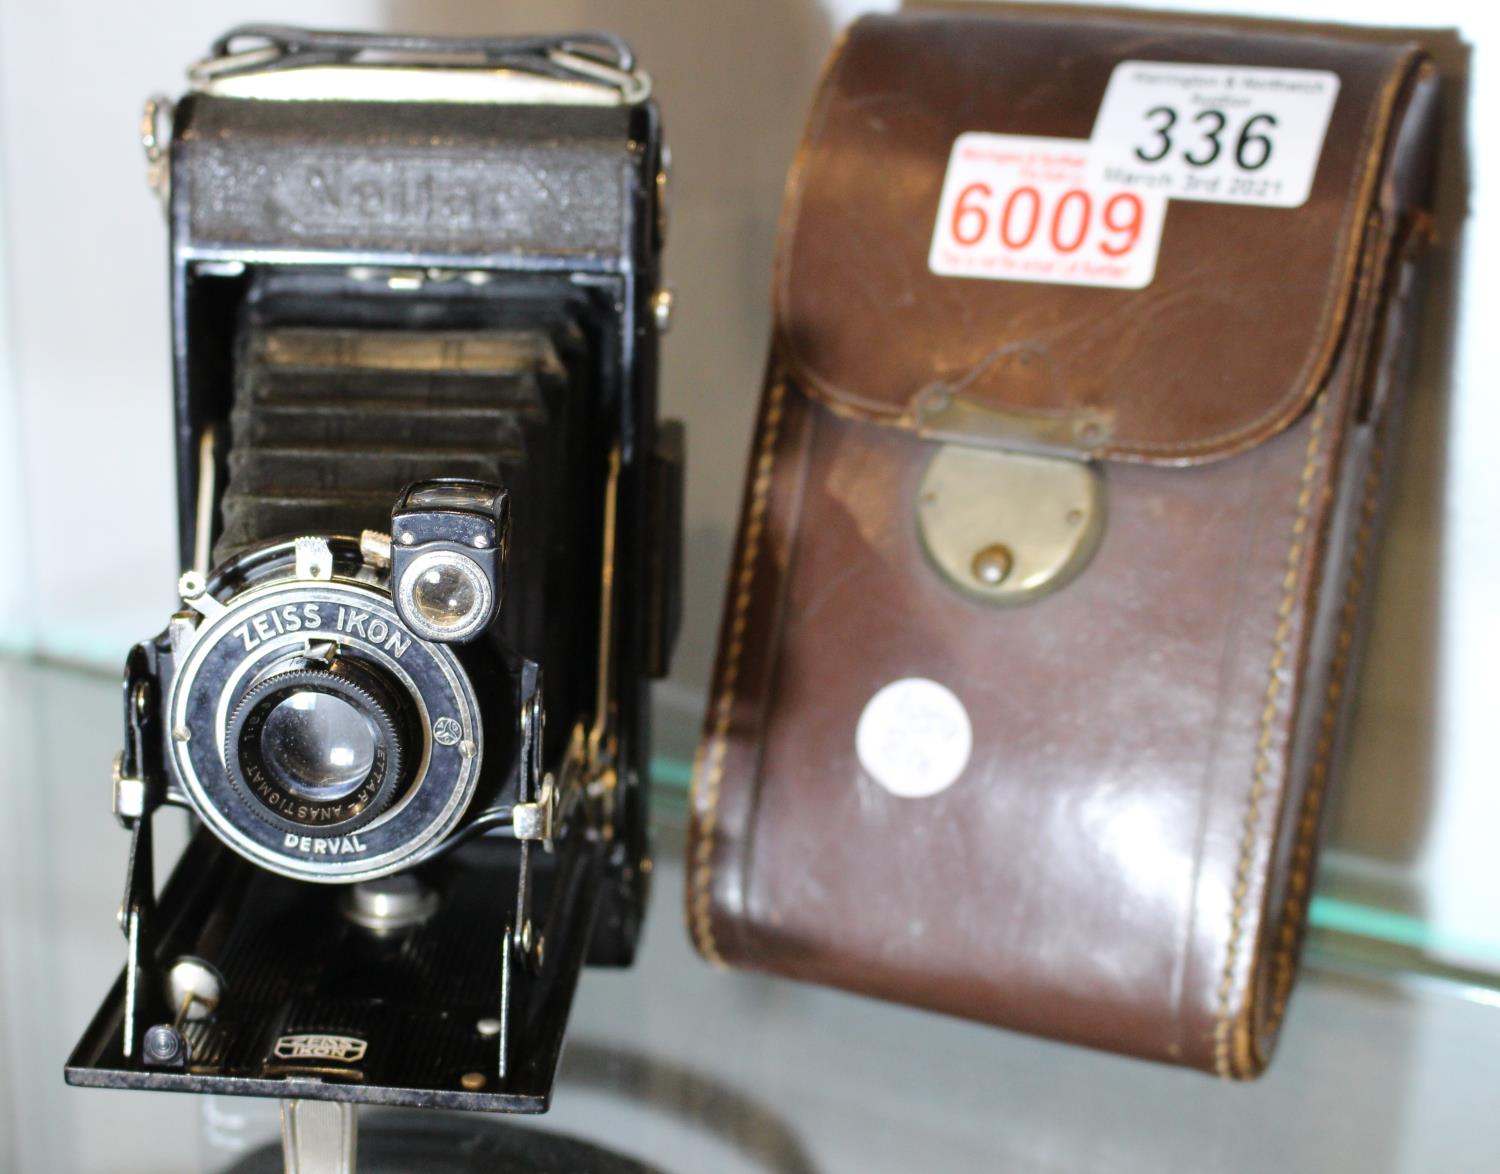 Zeiss Ikon Nettar folding camera with Nettar lens and case. P&P Group 1 (£14+VAT for the first lot